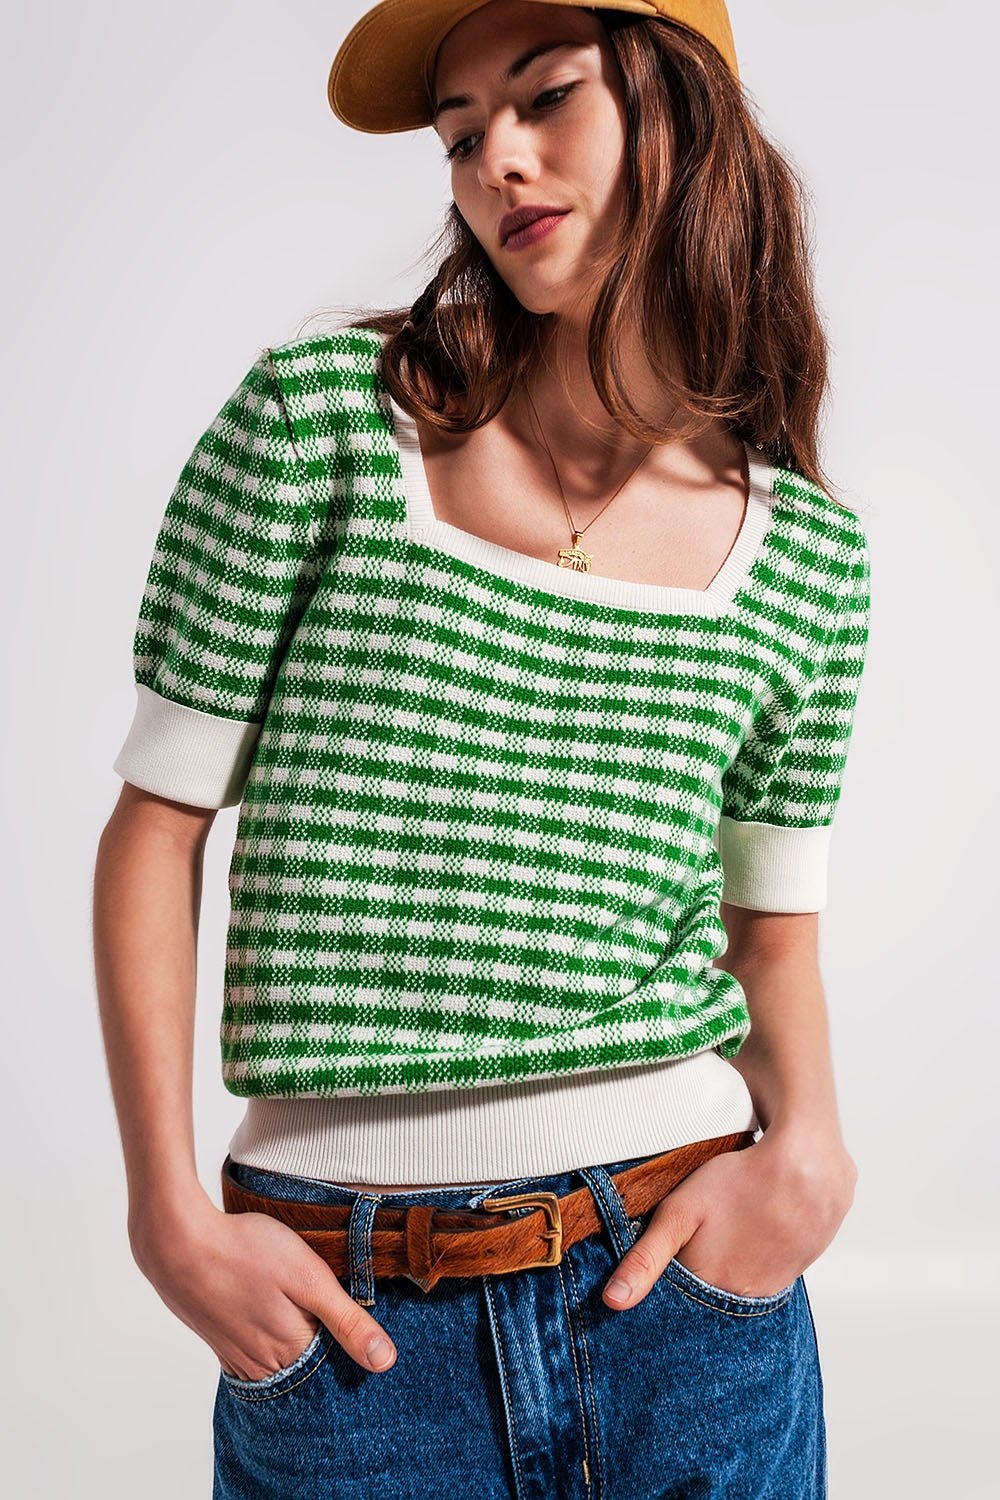 Square Neck Jumper in Green and White - Mack & Harvie